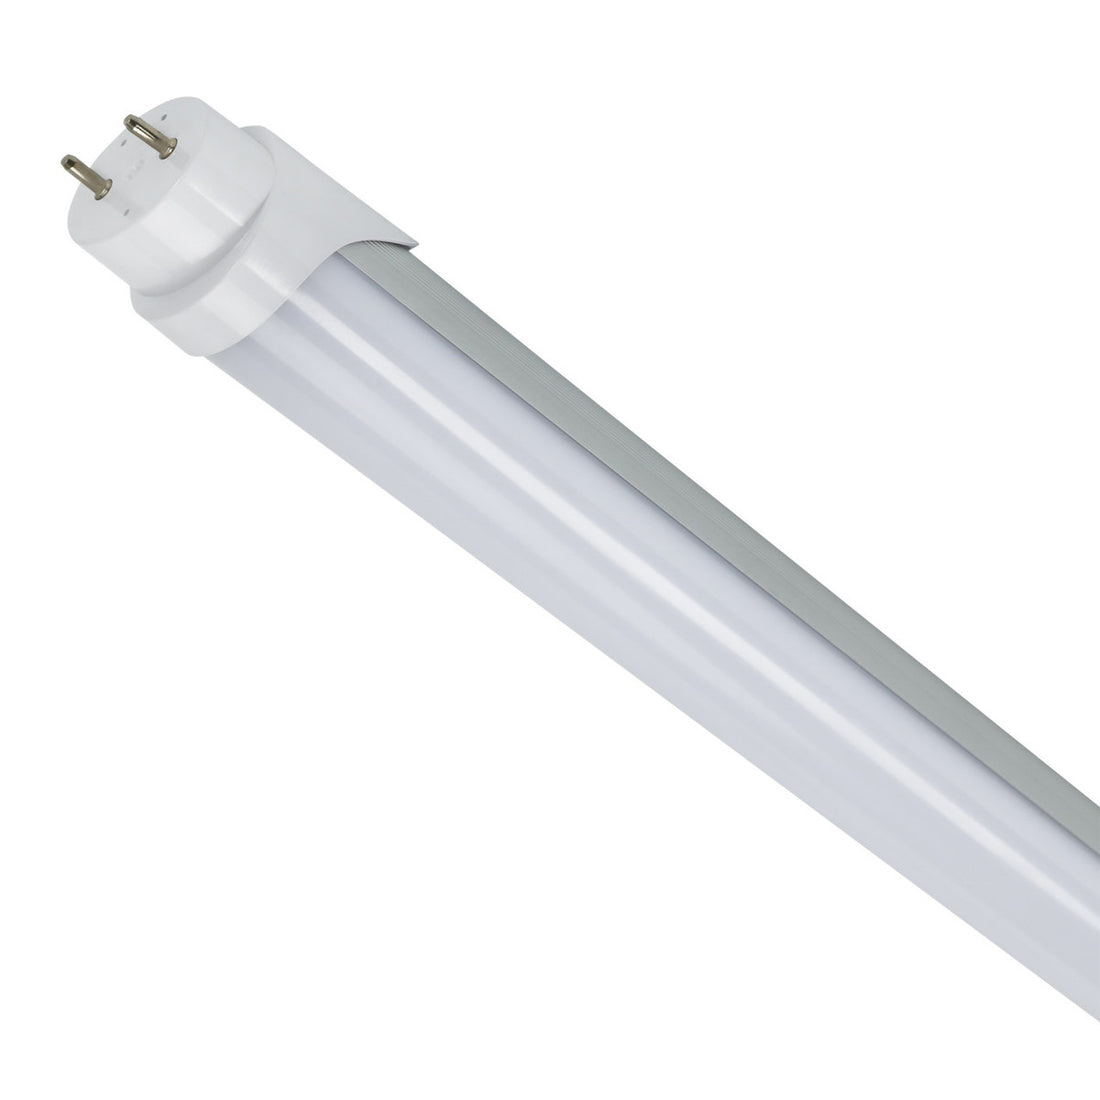 Dual-Mode T8 LED Tube - 15W, 4ft, 5000K, 100-277VAC Input, Switch Dimming, 140¬∞ Beam Angle, Frosted Lens, Circular Aluminum Housing, Two-End Input - 30 Pack